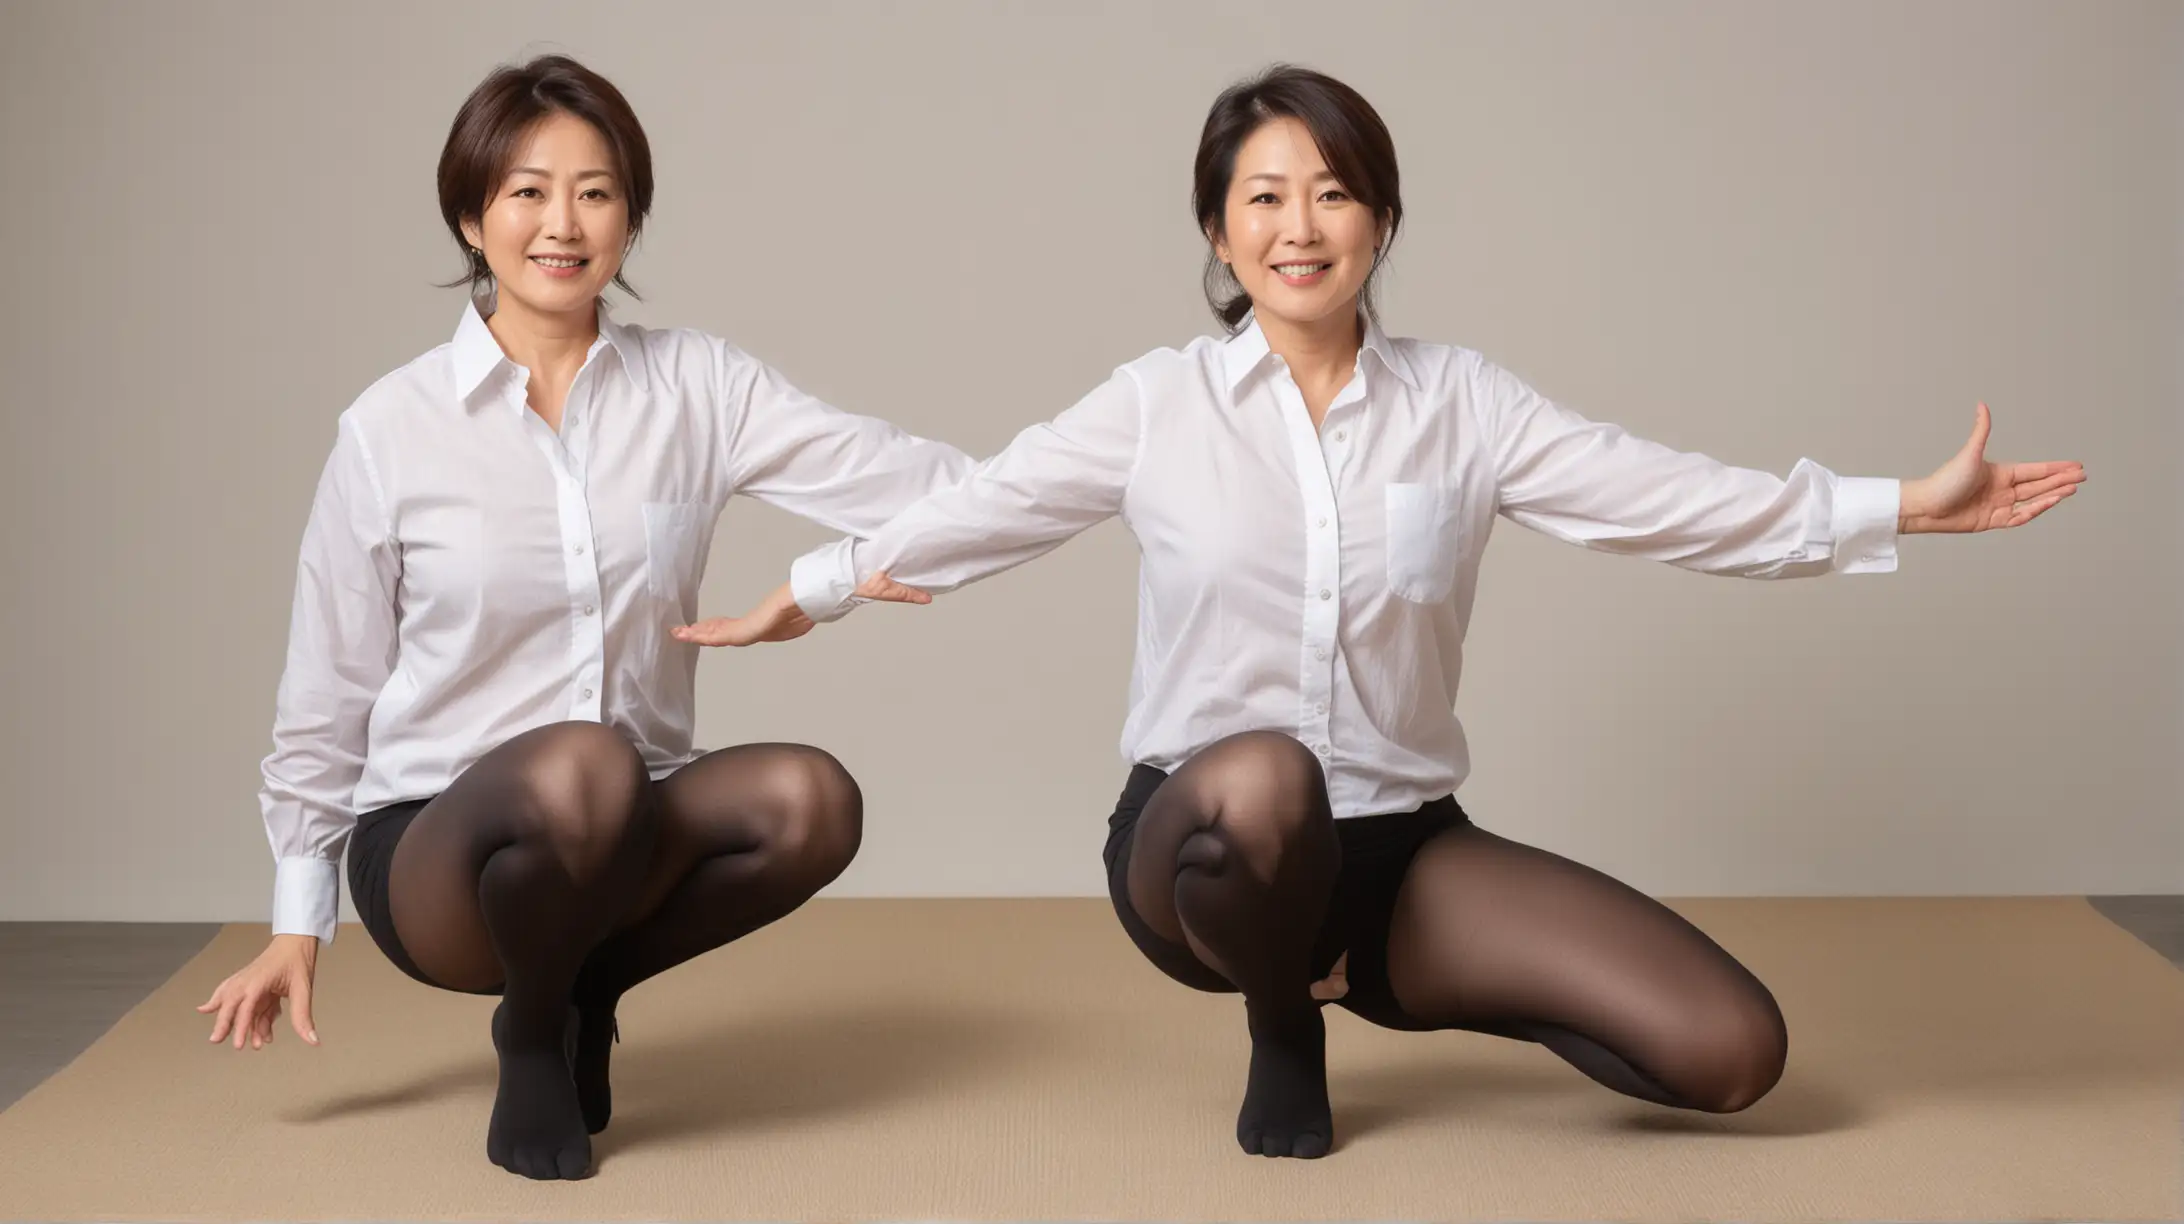 Beautiful Mature Japanese Women wearing white button down shirts, Black Tights, no shoes, no pants or skirt, arms stretched overhead squatting slowly